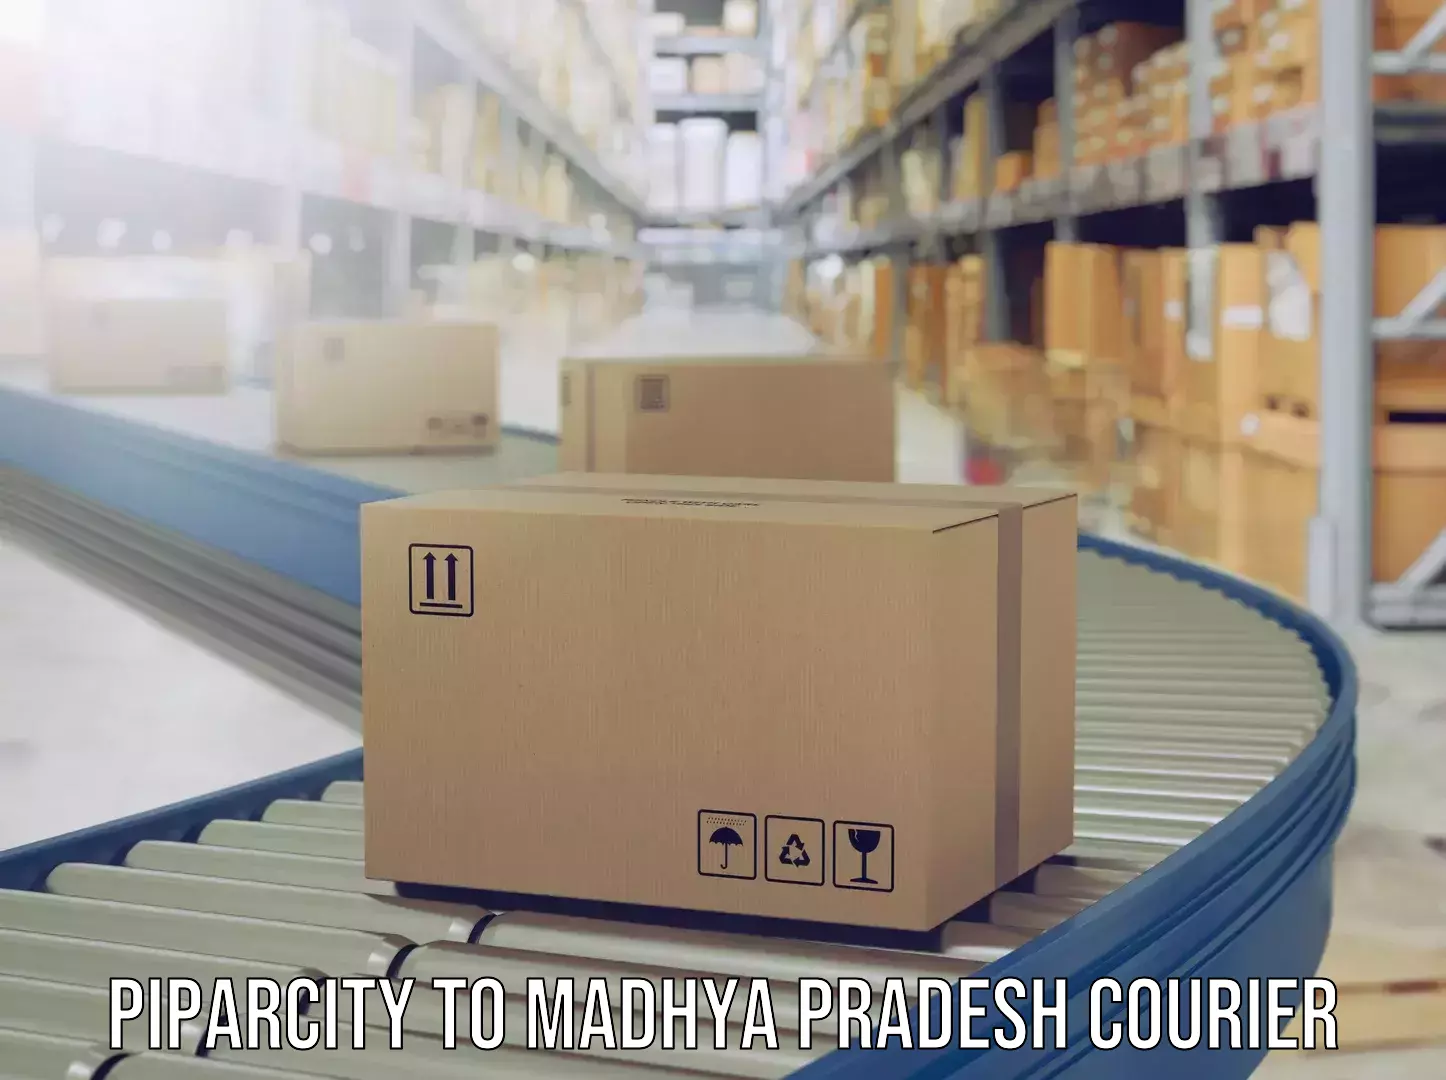 Express baggage shipping Piparcity to Chhatarpur